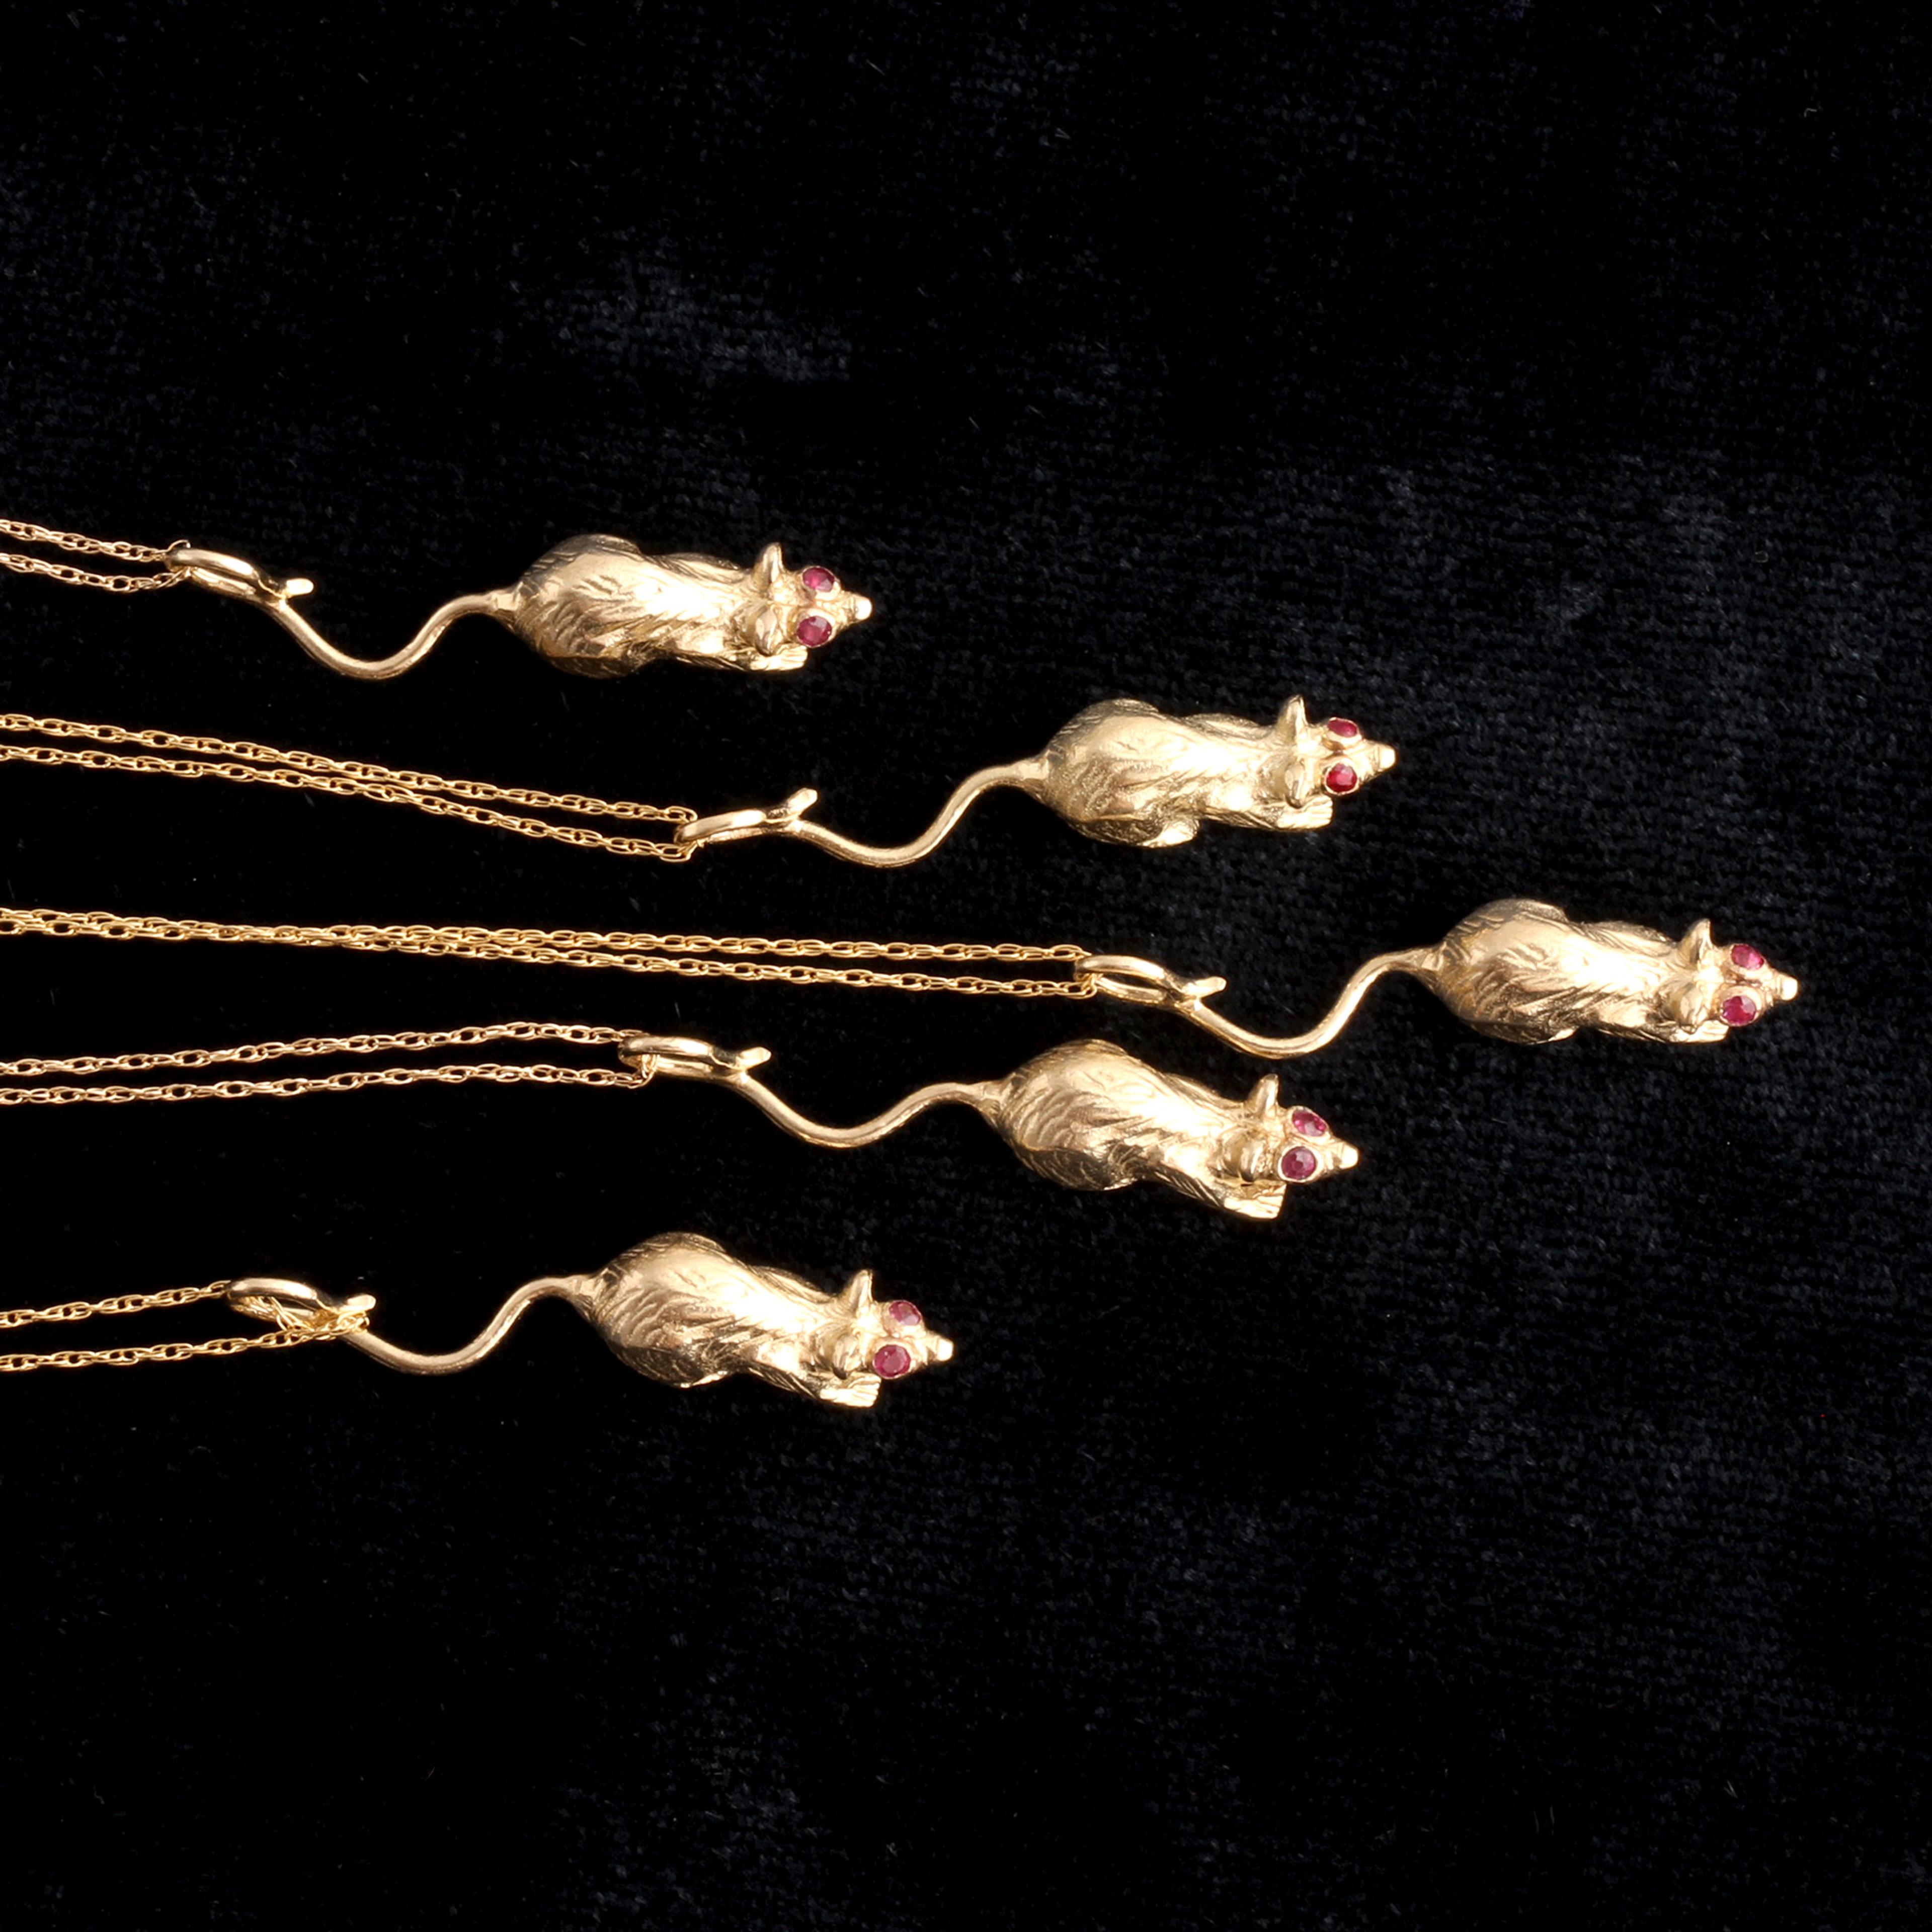 Detail of 5 ruby-eyed rat necklaces